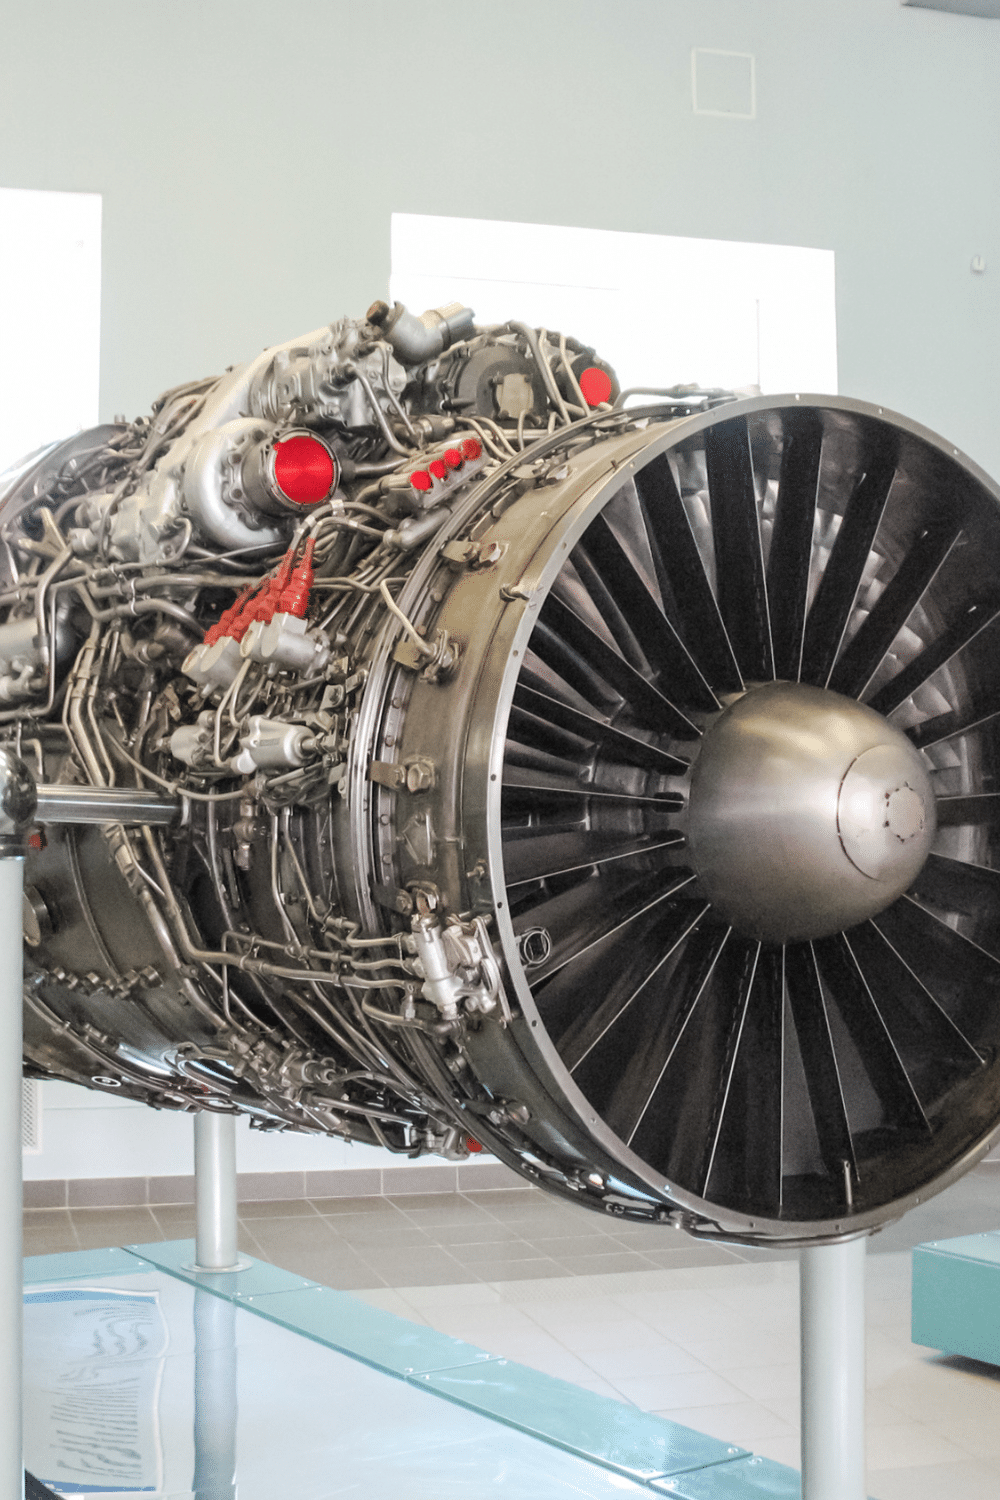 Part of an aircraft being displayed in a museum